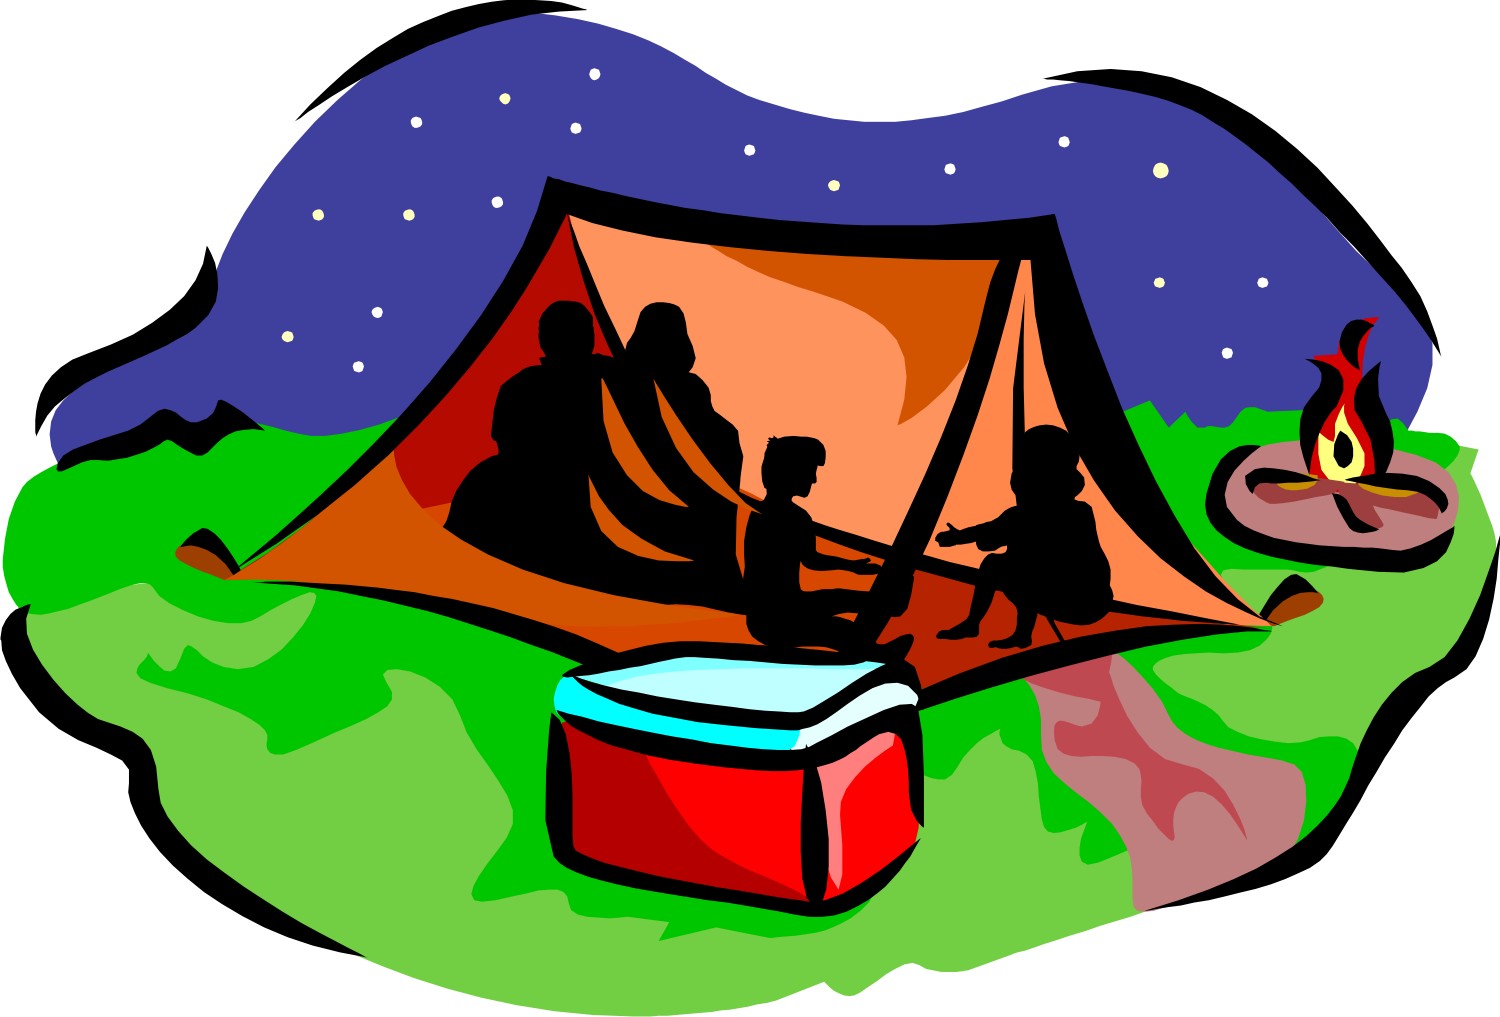 Images Of Cartoon Tents - Clipart library